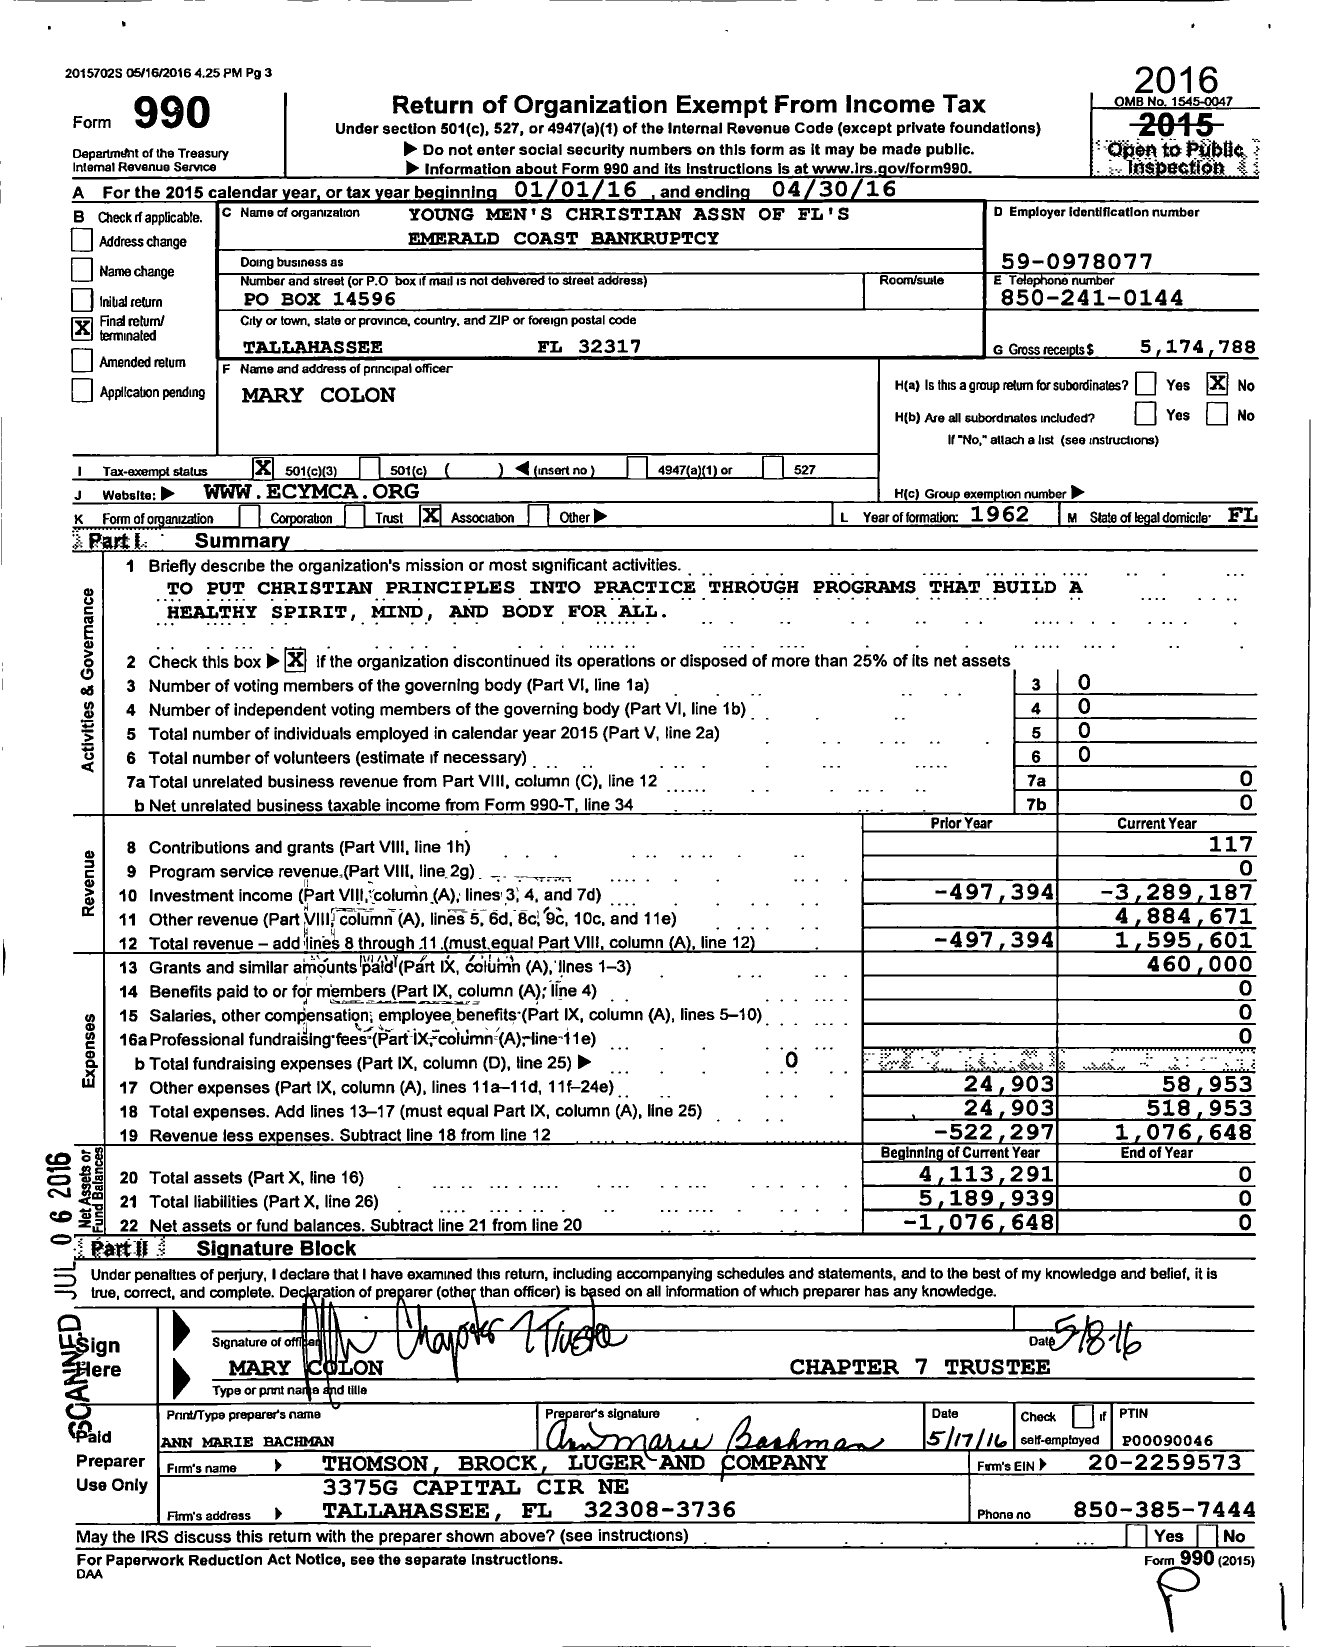 Image of first page of 2015 Form 990 for YMCA of Florida's of Emerald Coast